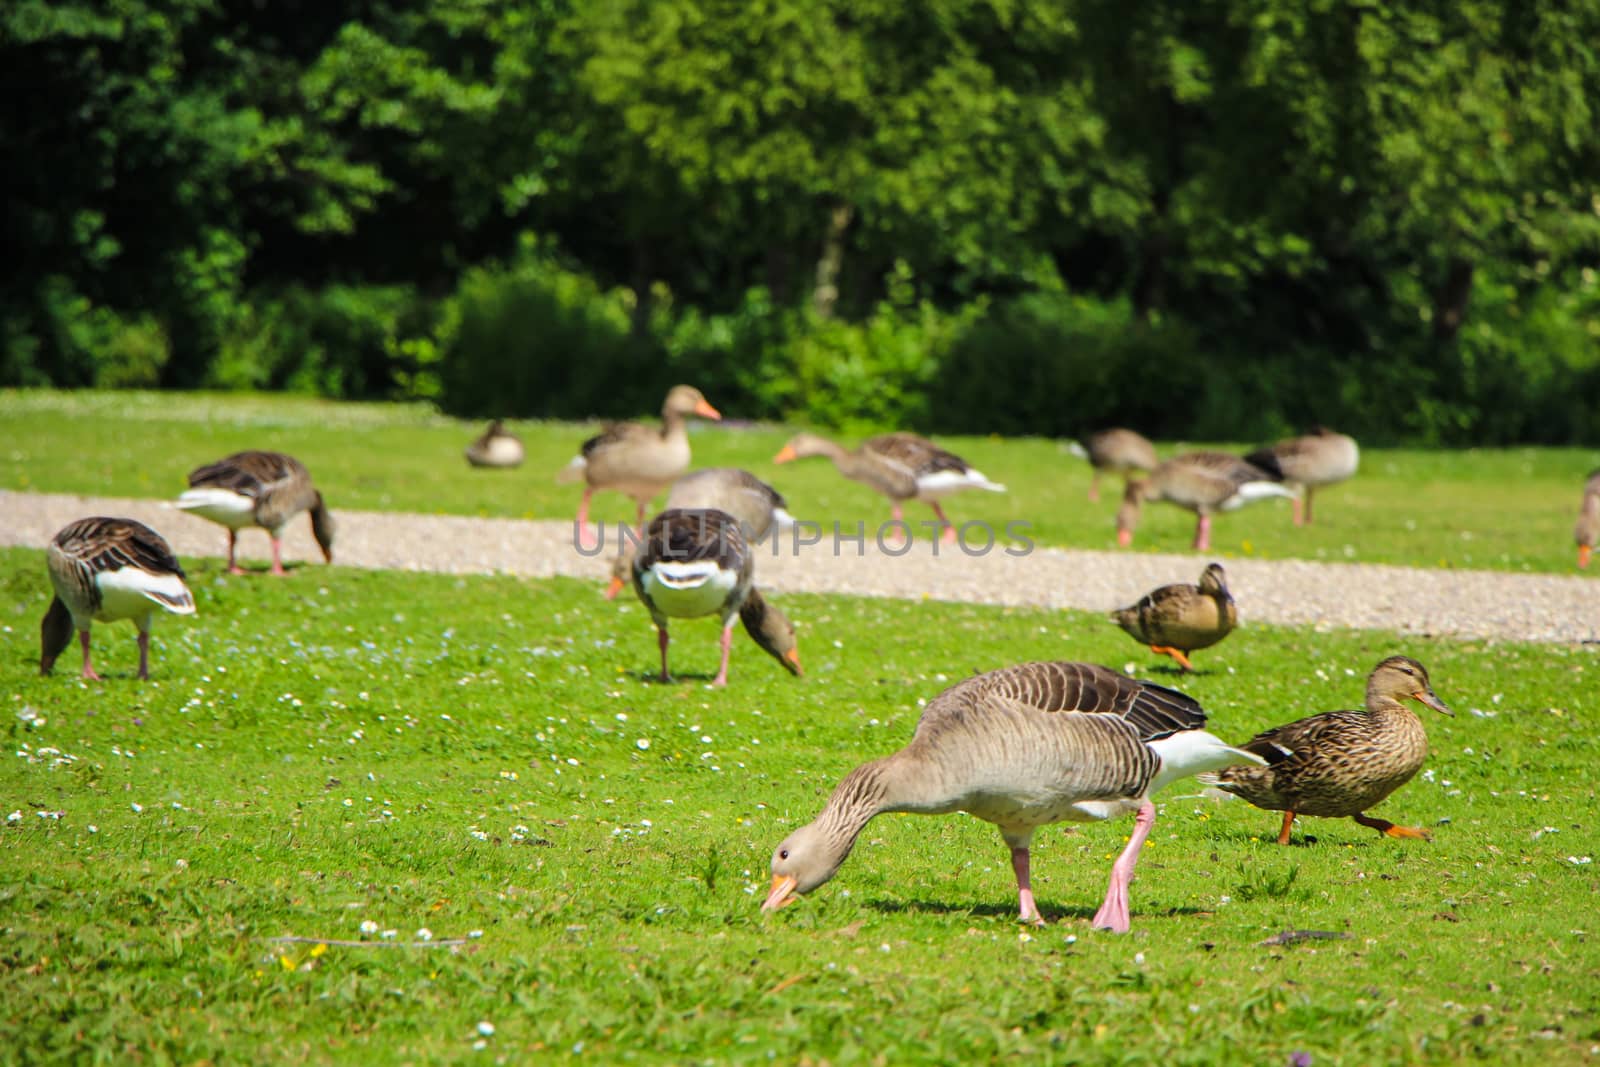 Geese and Ducks in Park by Mads_Hjorth_Jakobsen